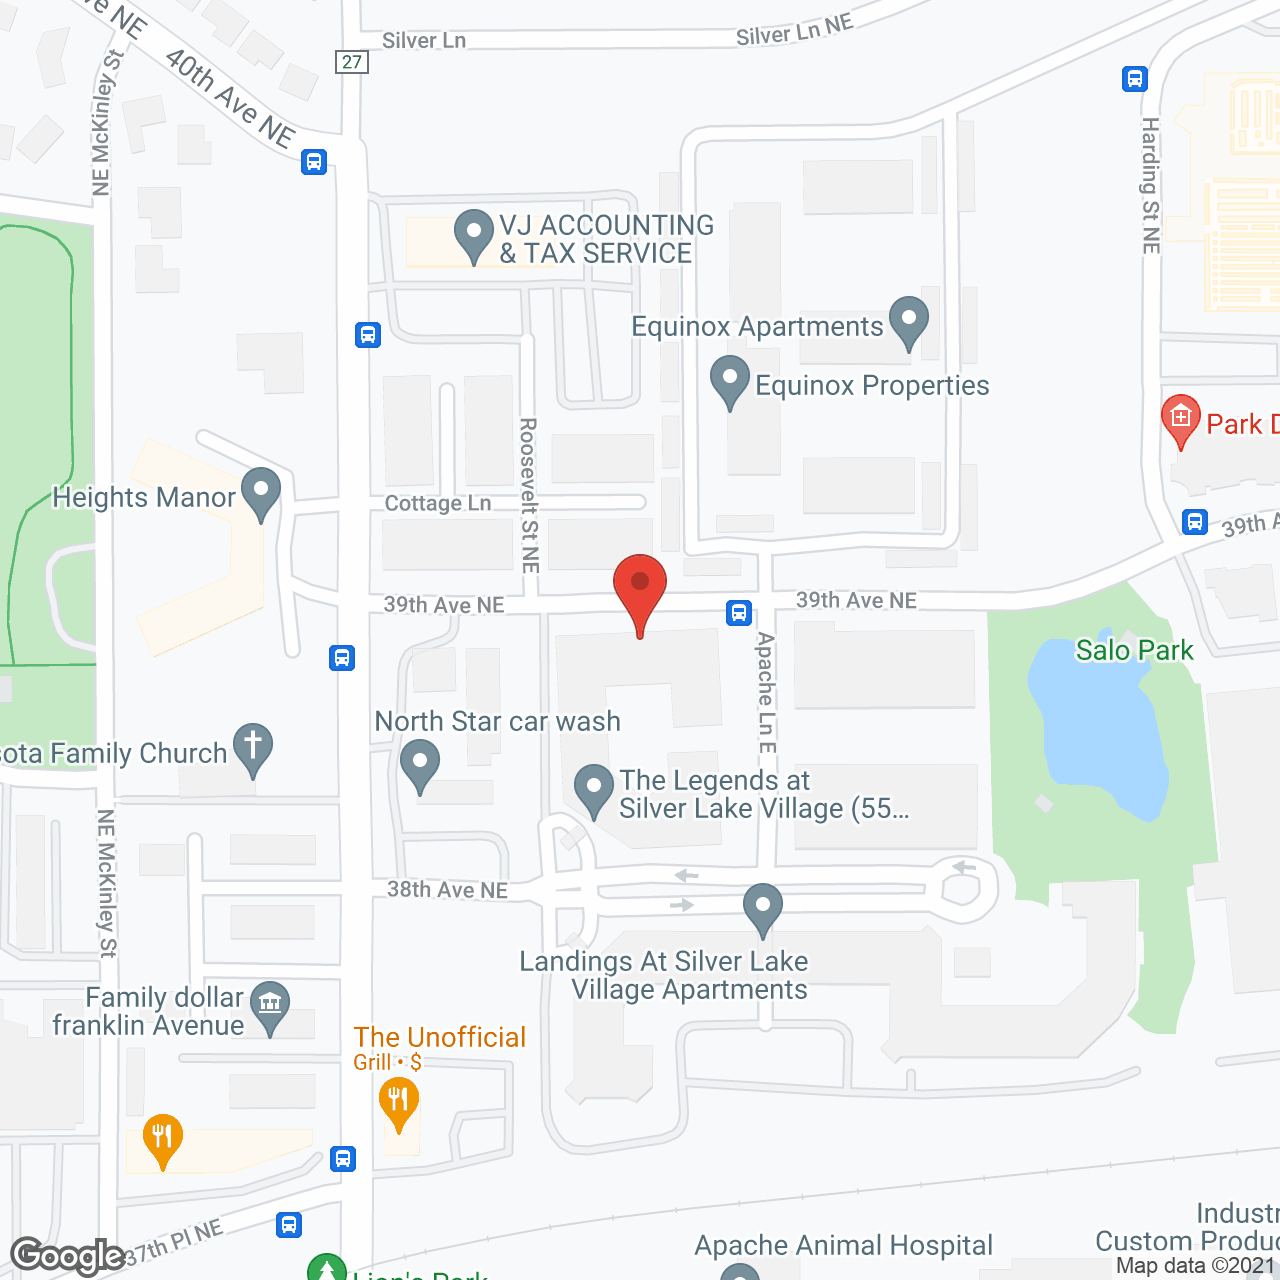 The Legends at Silver Lake Village in google map